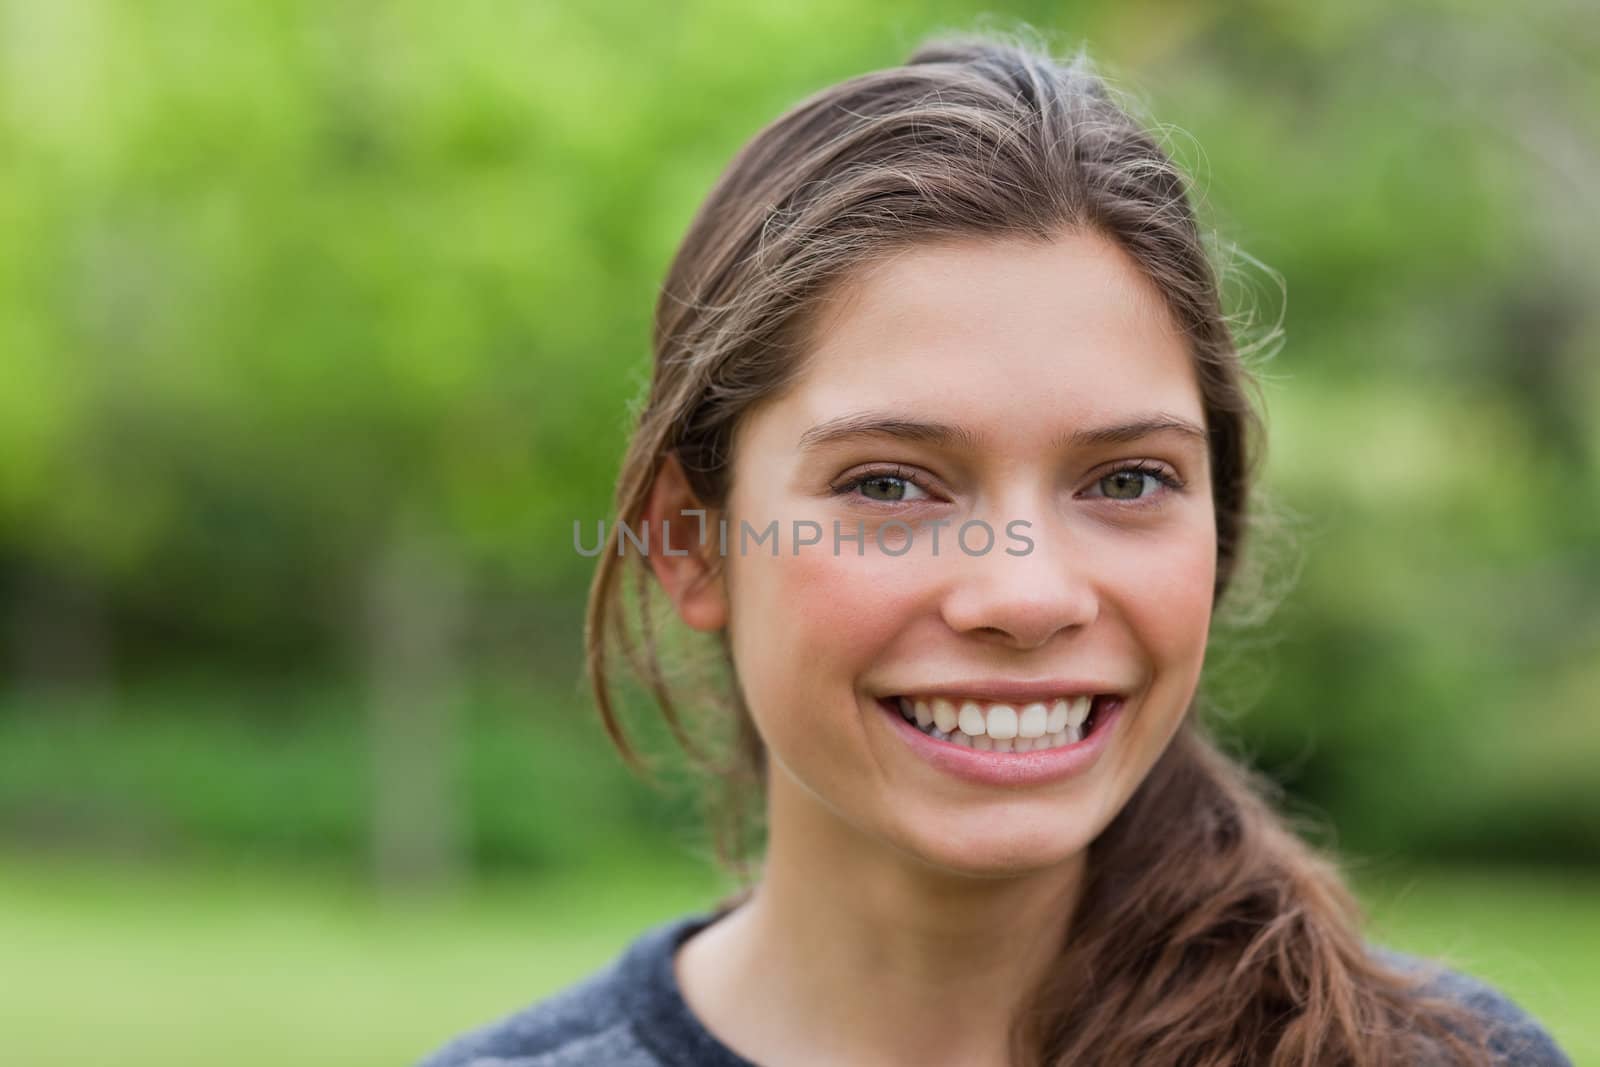 Young woman looking at the camera while showing a beaming smile